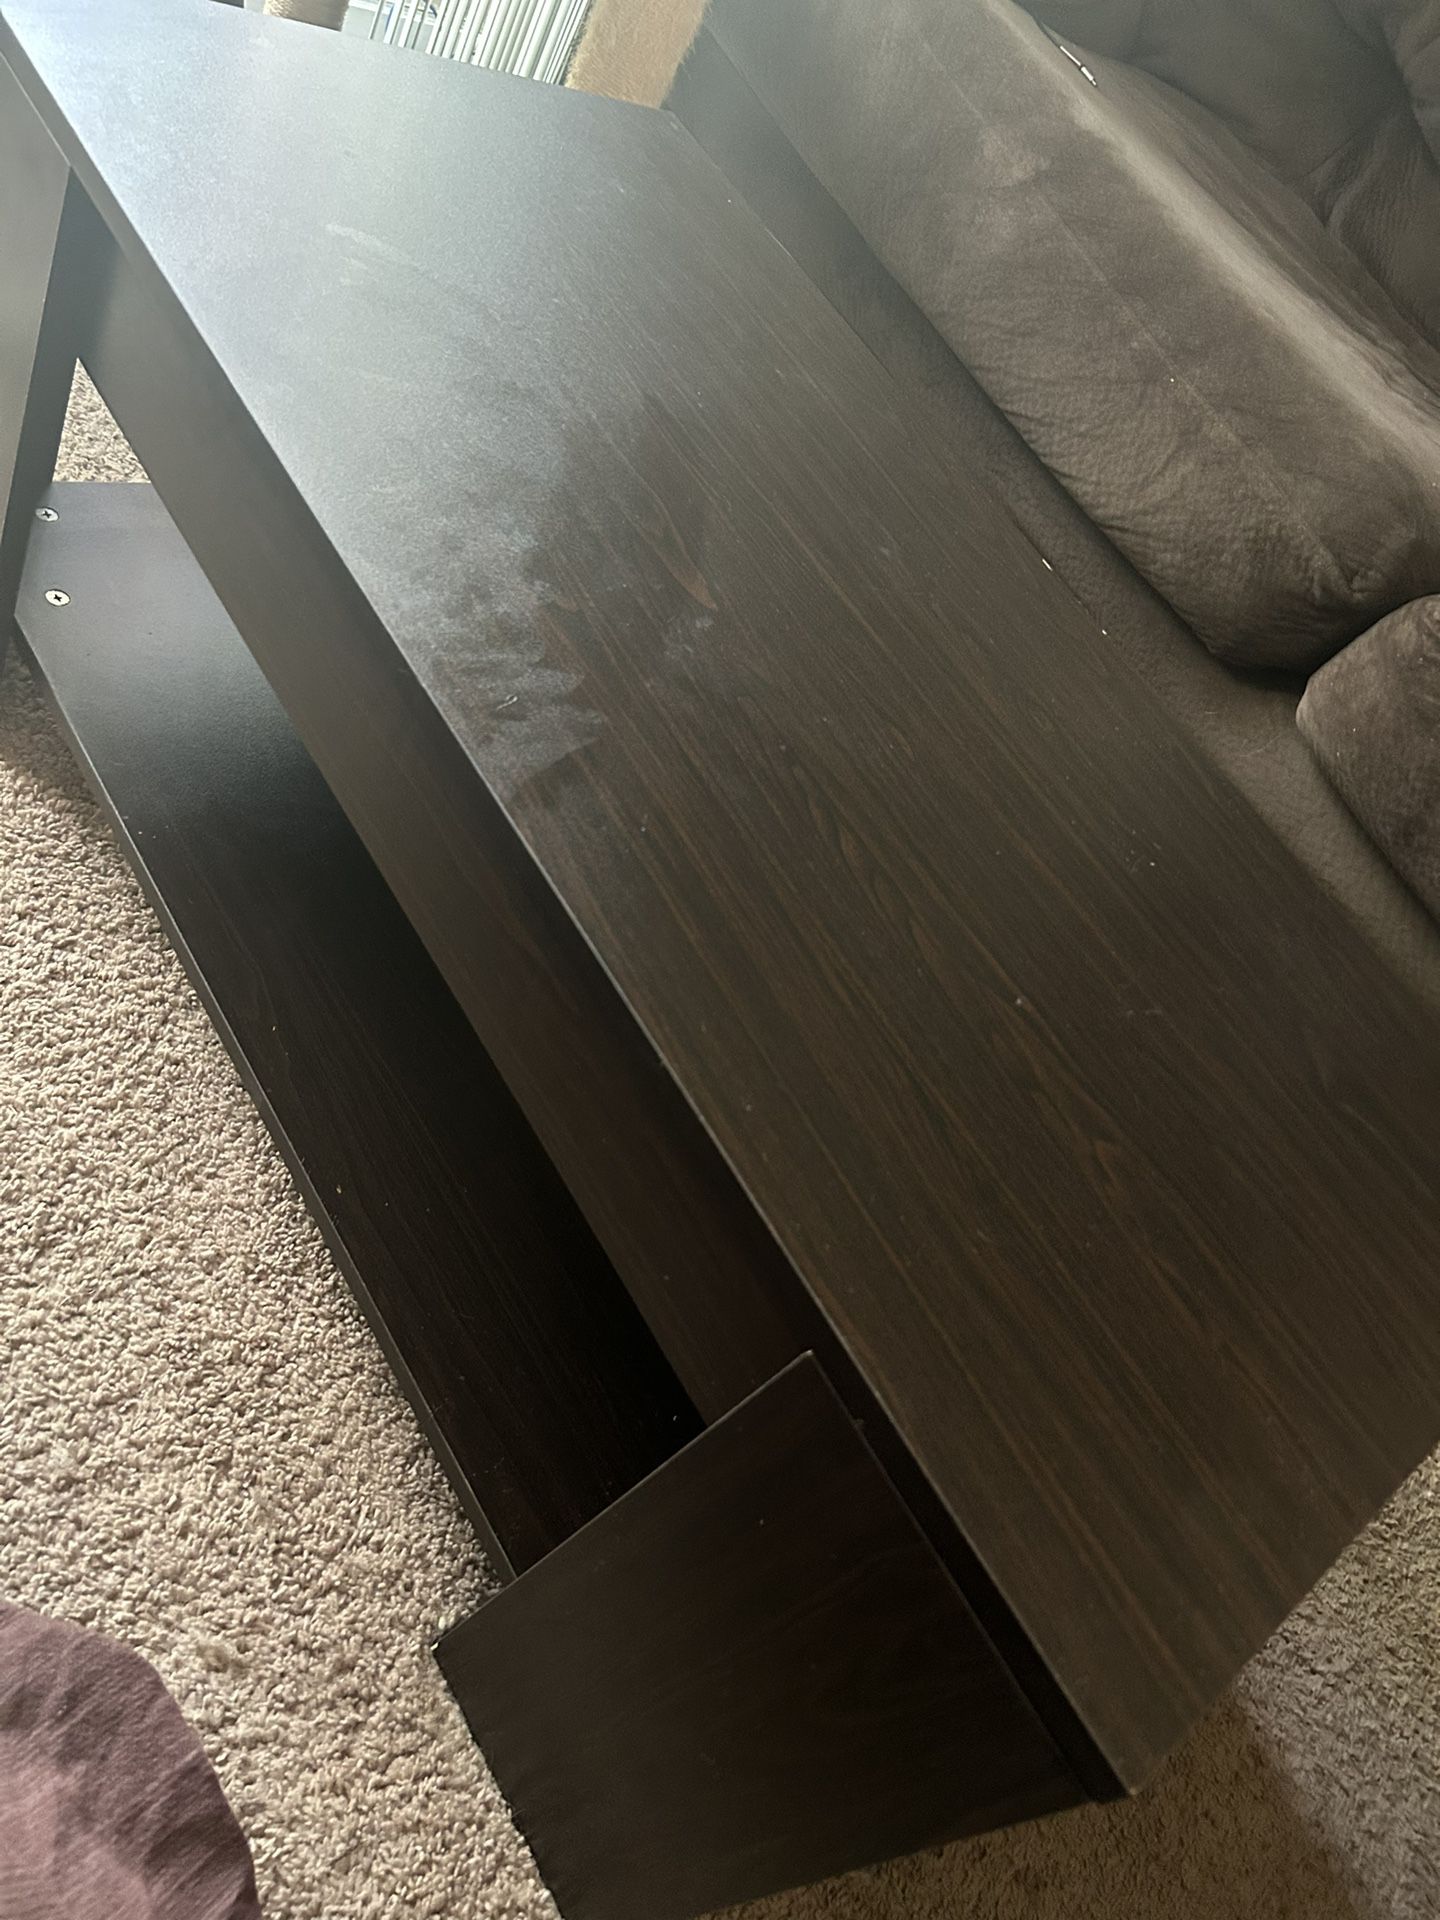 coffee table that comes up towards you